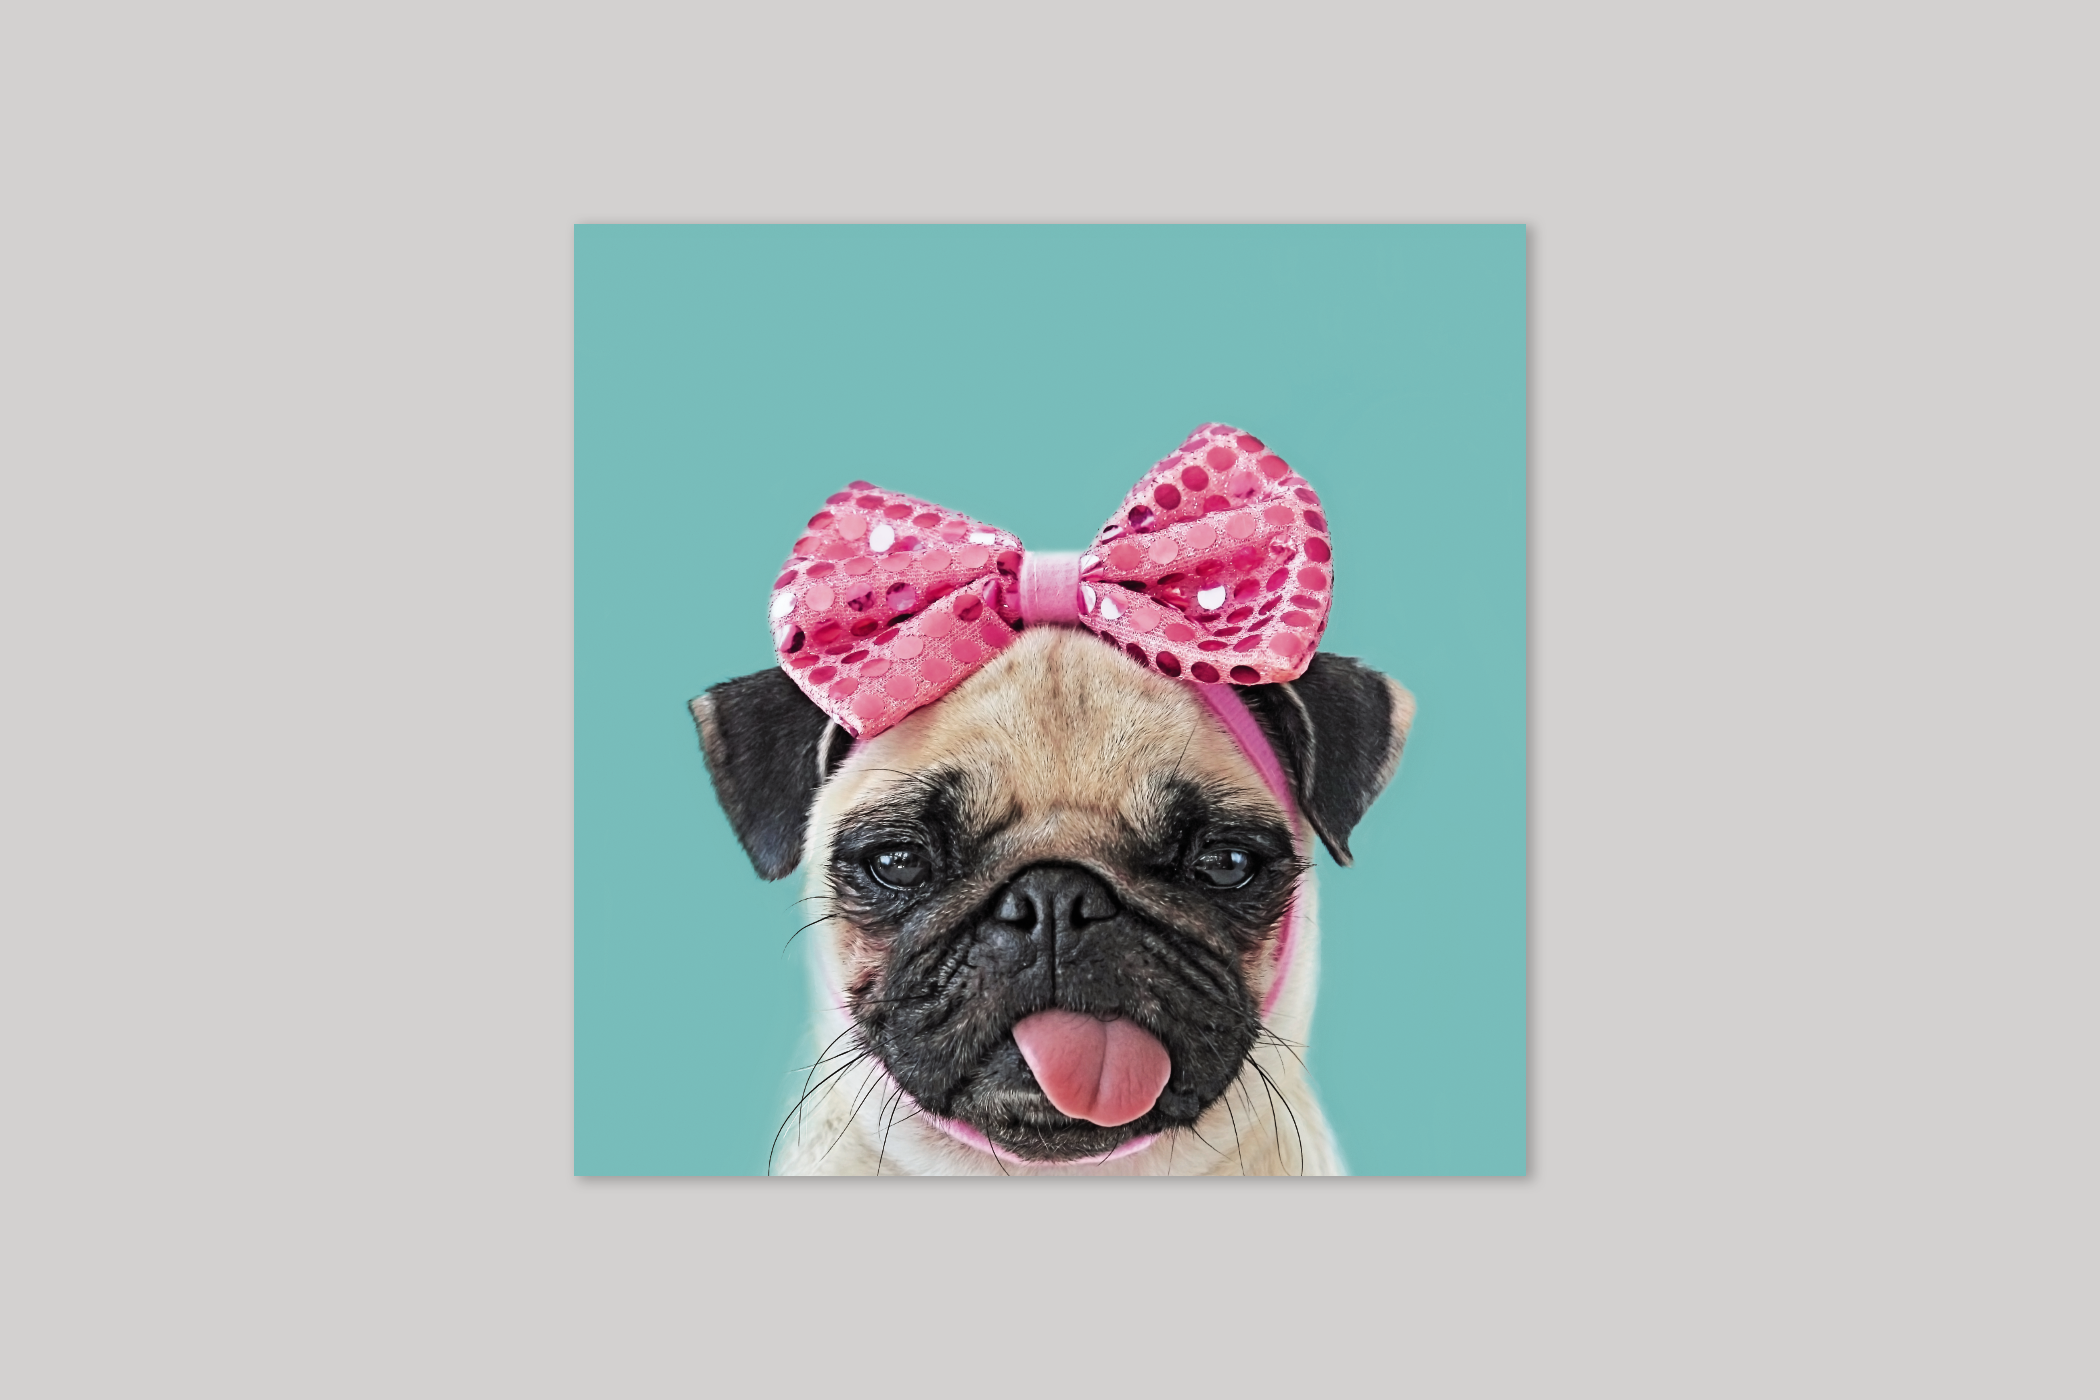 Pretty Pug from Wildthings range of greeting cards by Icon.